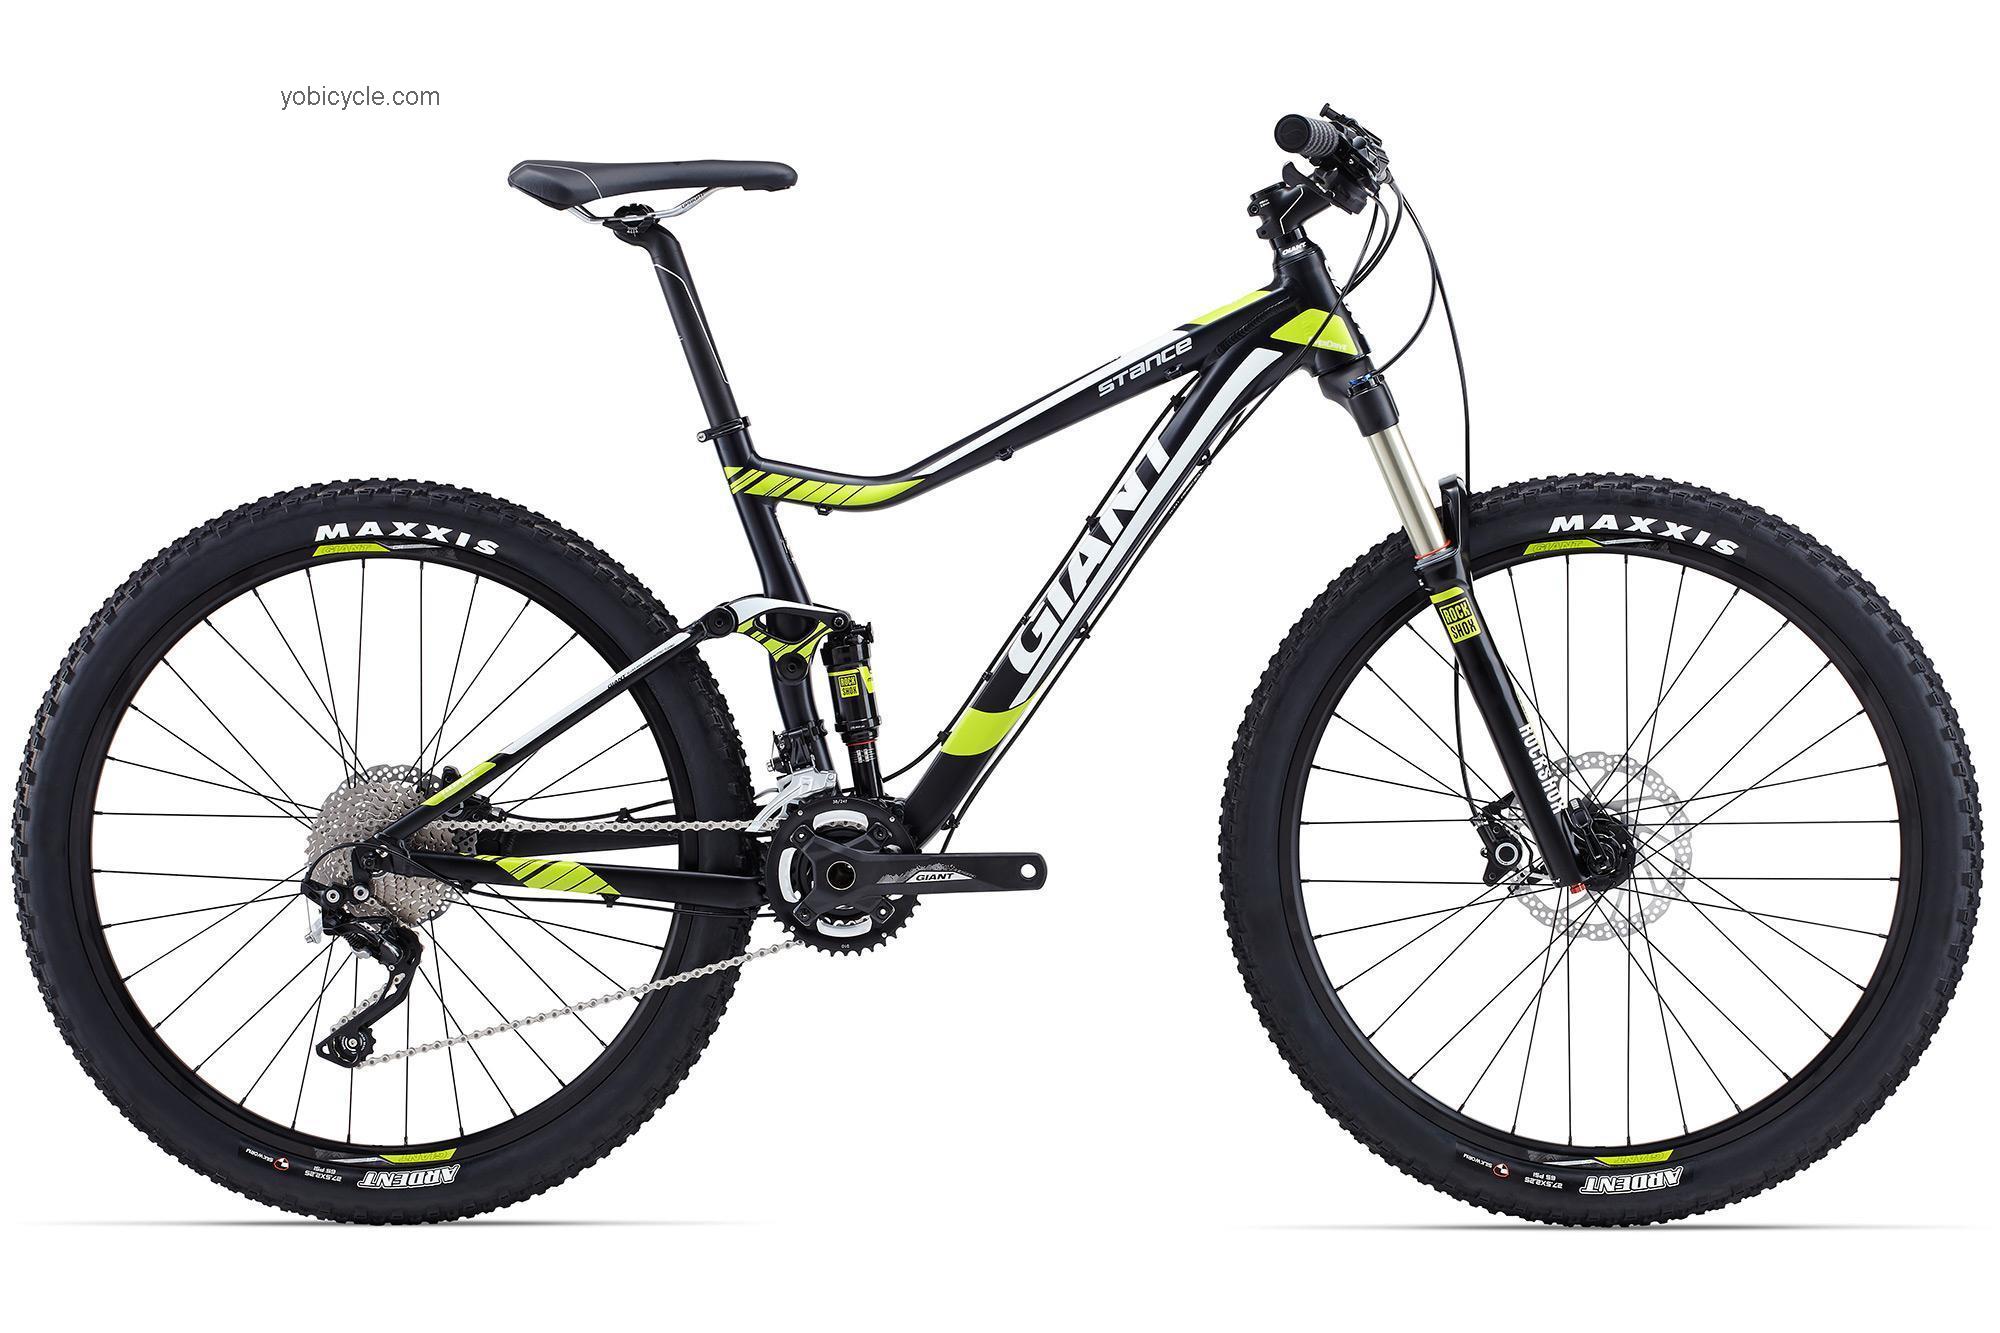 Giant Stance 27.5 1 2015 comparison online with competitors